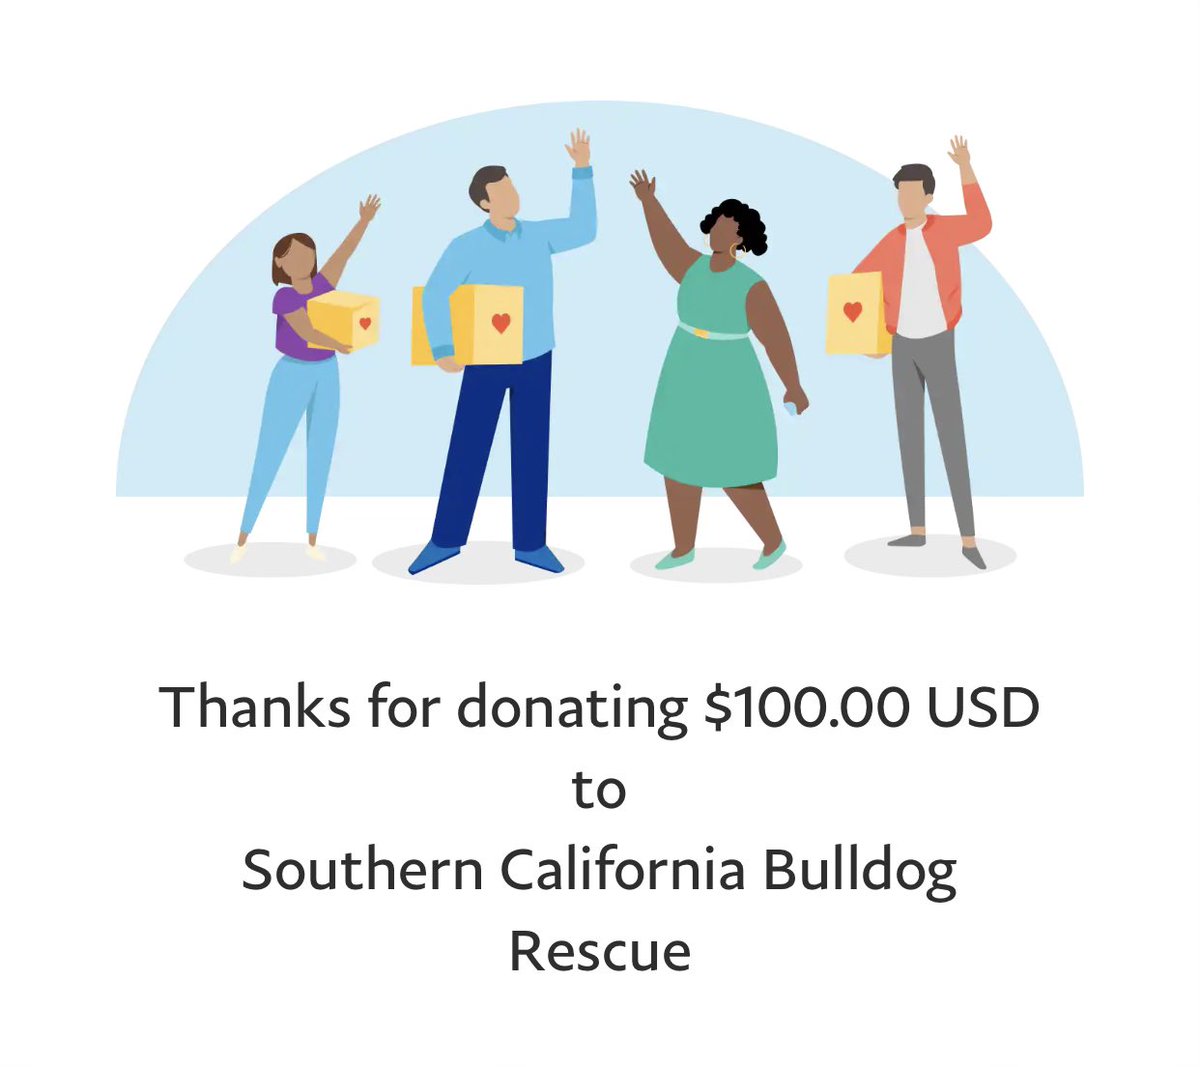 Donation Link:  https://socalbulldogrescue.org/help-us/donate/ Please post your donation screenshots as a reply to THIS tweet as we added below. The winner will be selected Friday, May 14th. Thank you in advance for participating and helping us honor such an amazing person.  #CallingAllAngels (3/3)